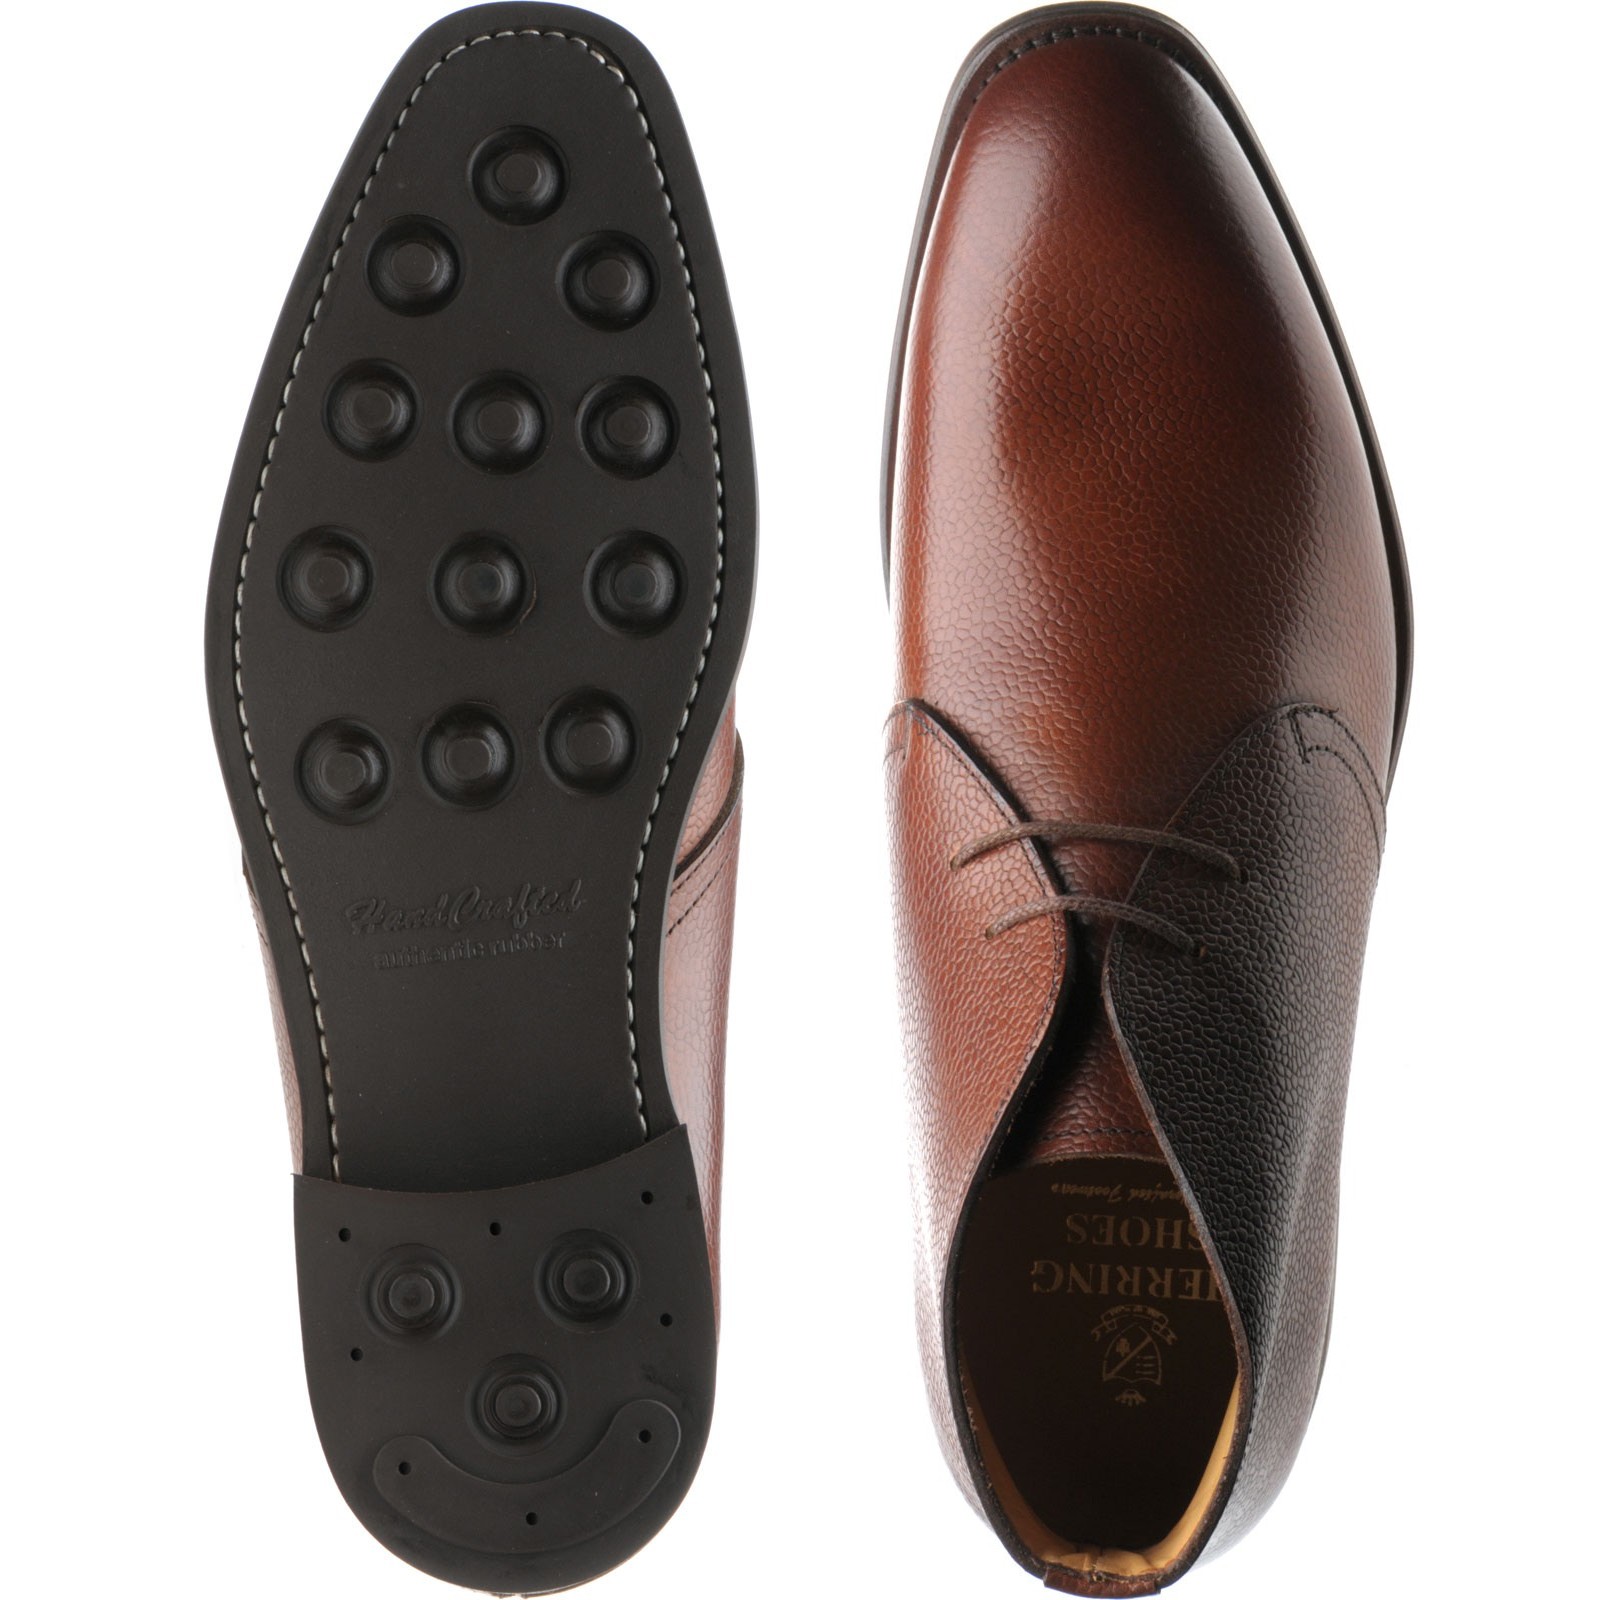 Herring shoes | Herring Classic | Cannock rubber-soled Chukka boots in ...